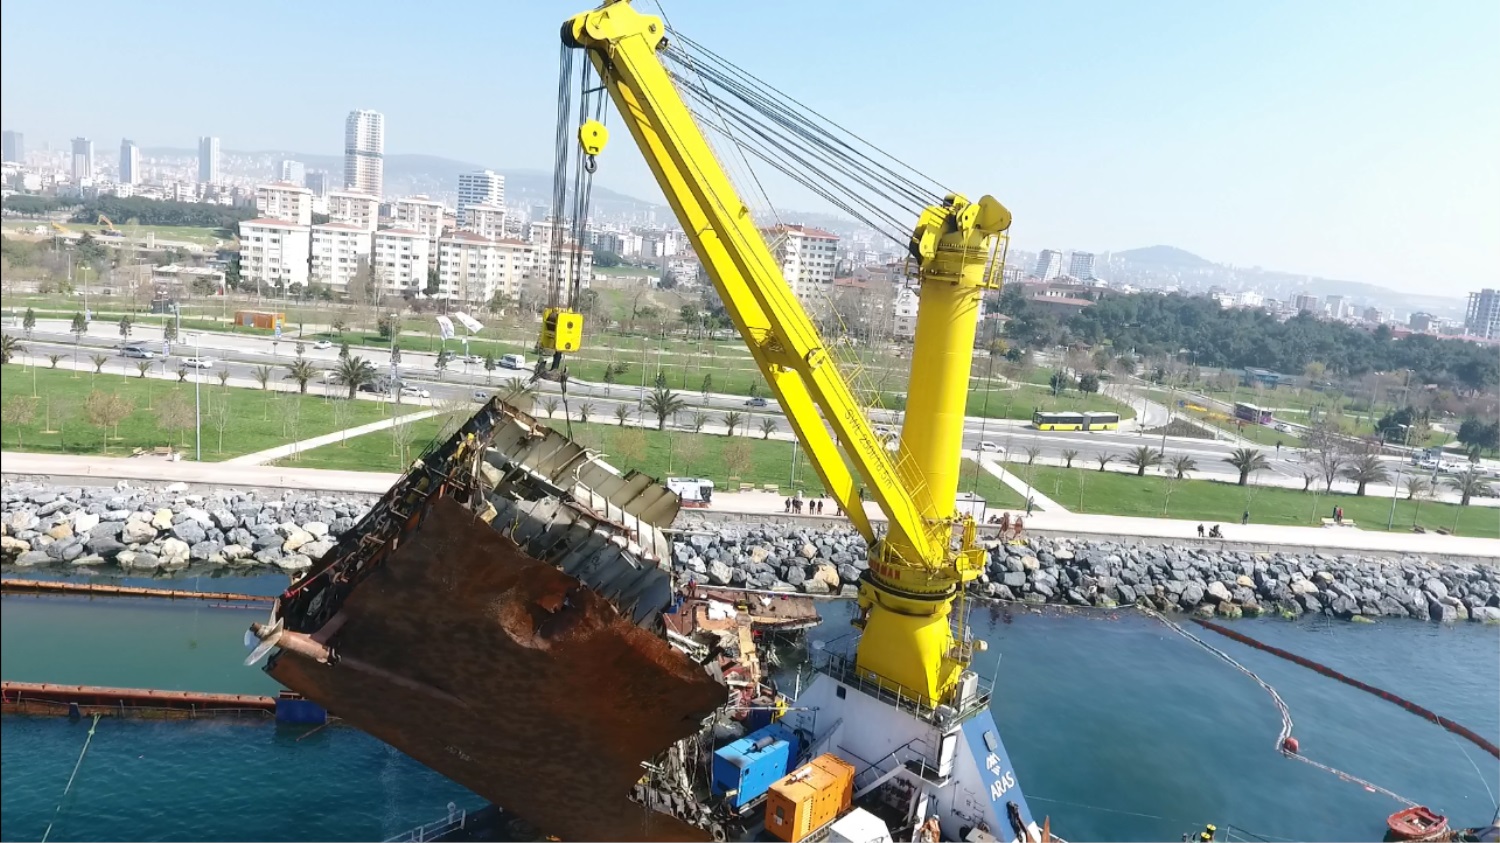 REMOVAL OF THE WRECKAGE OF THE SHIP M/V VOLGO DON 203